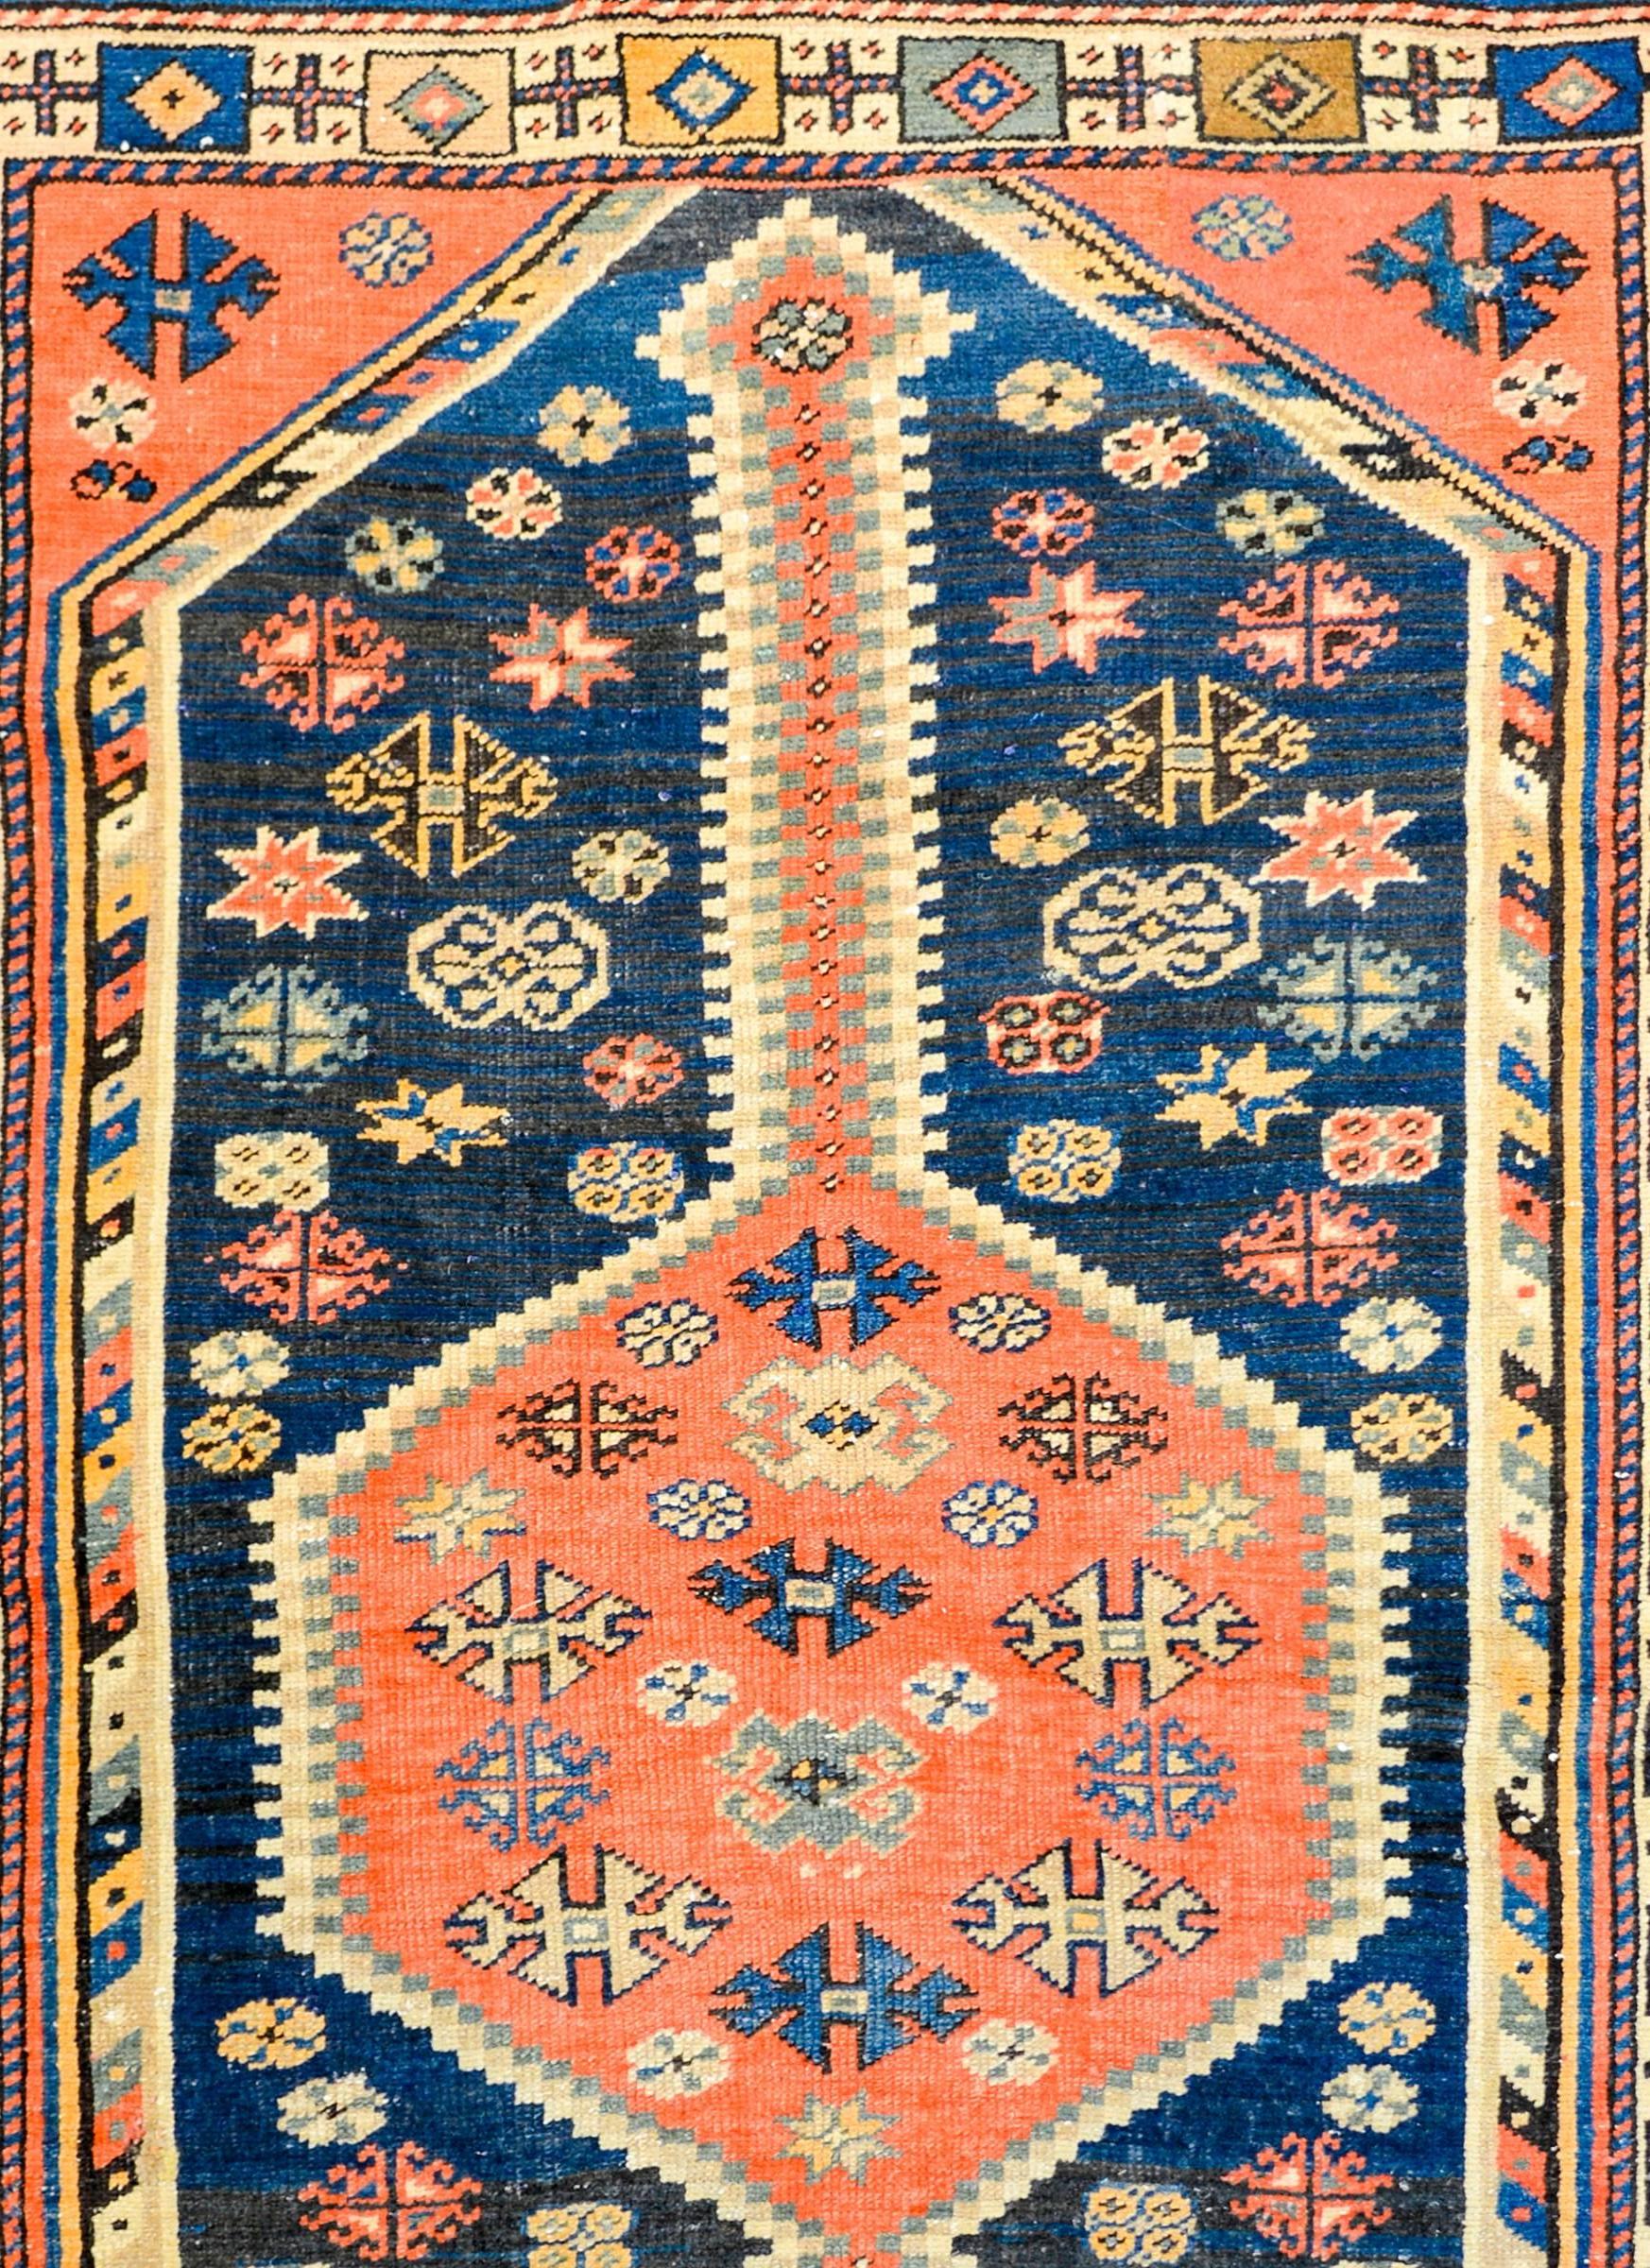 A wonderfully vivid early 20th century Persian Azeri rug with a large central hexagonal medallion woven with stylized flowers in light and dark indigo, gold, and green vegetable dyed wool, on a crimson wool background. The medallion lives amidst a